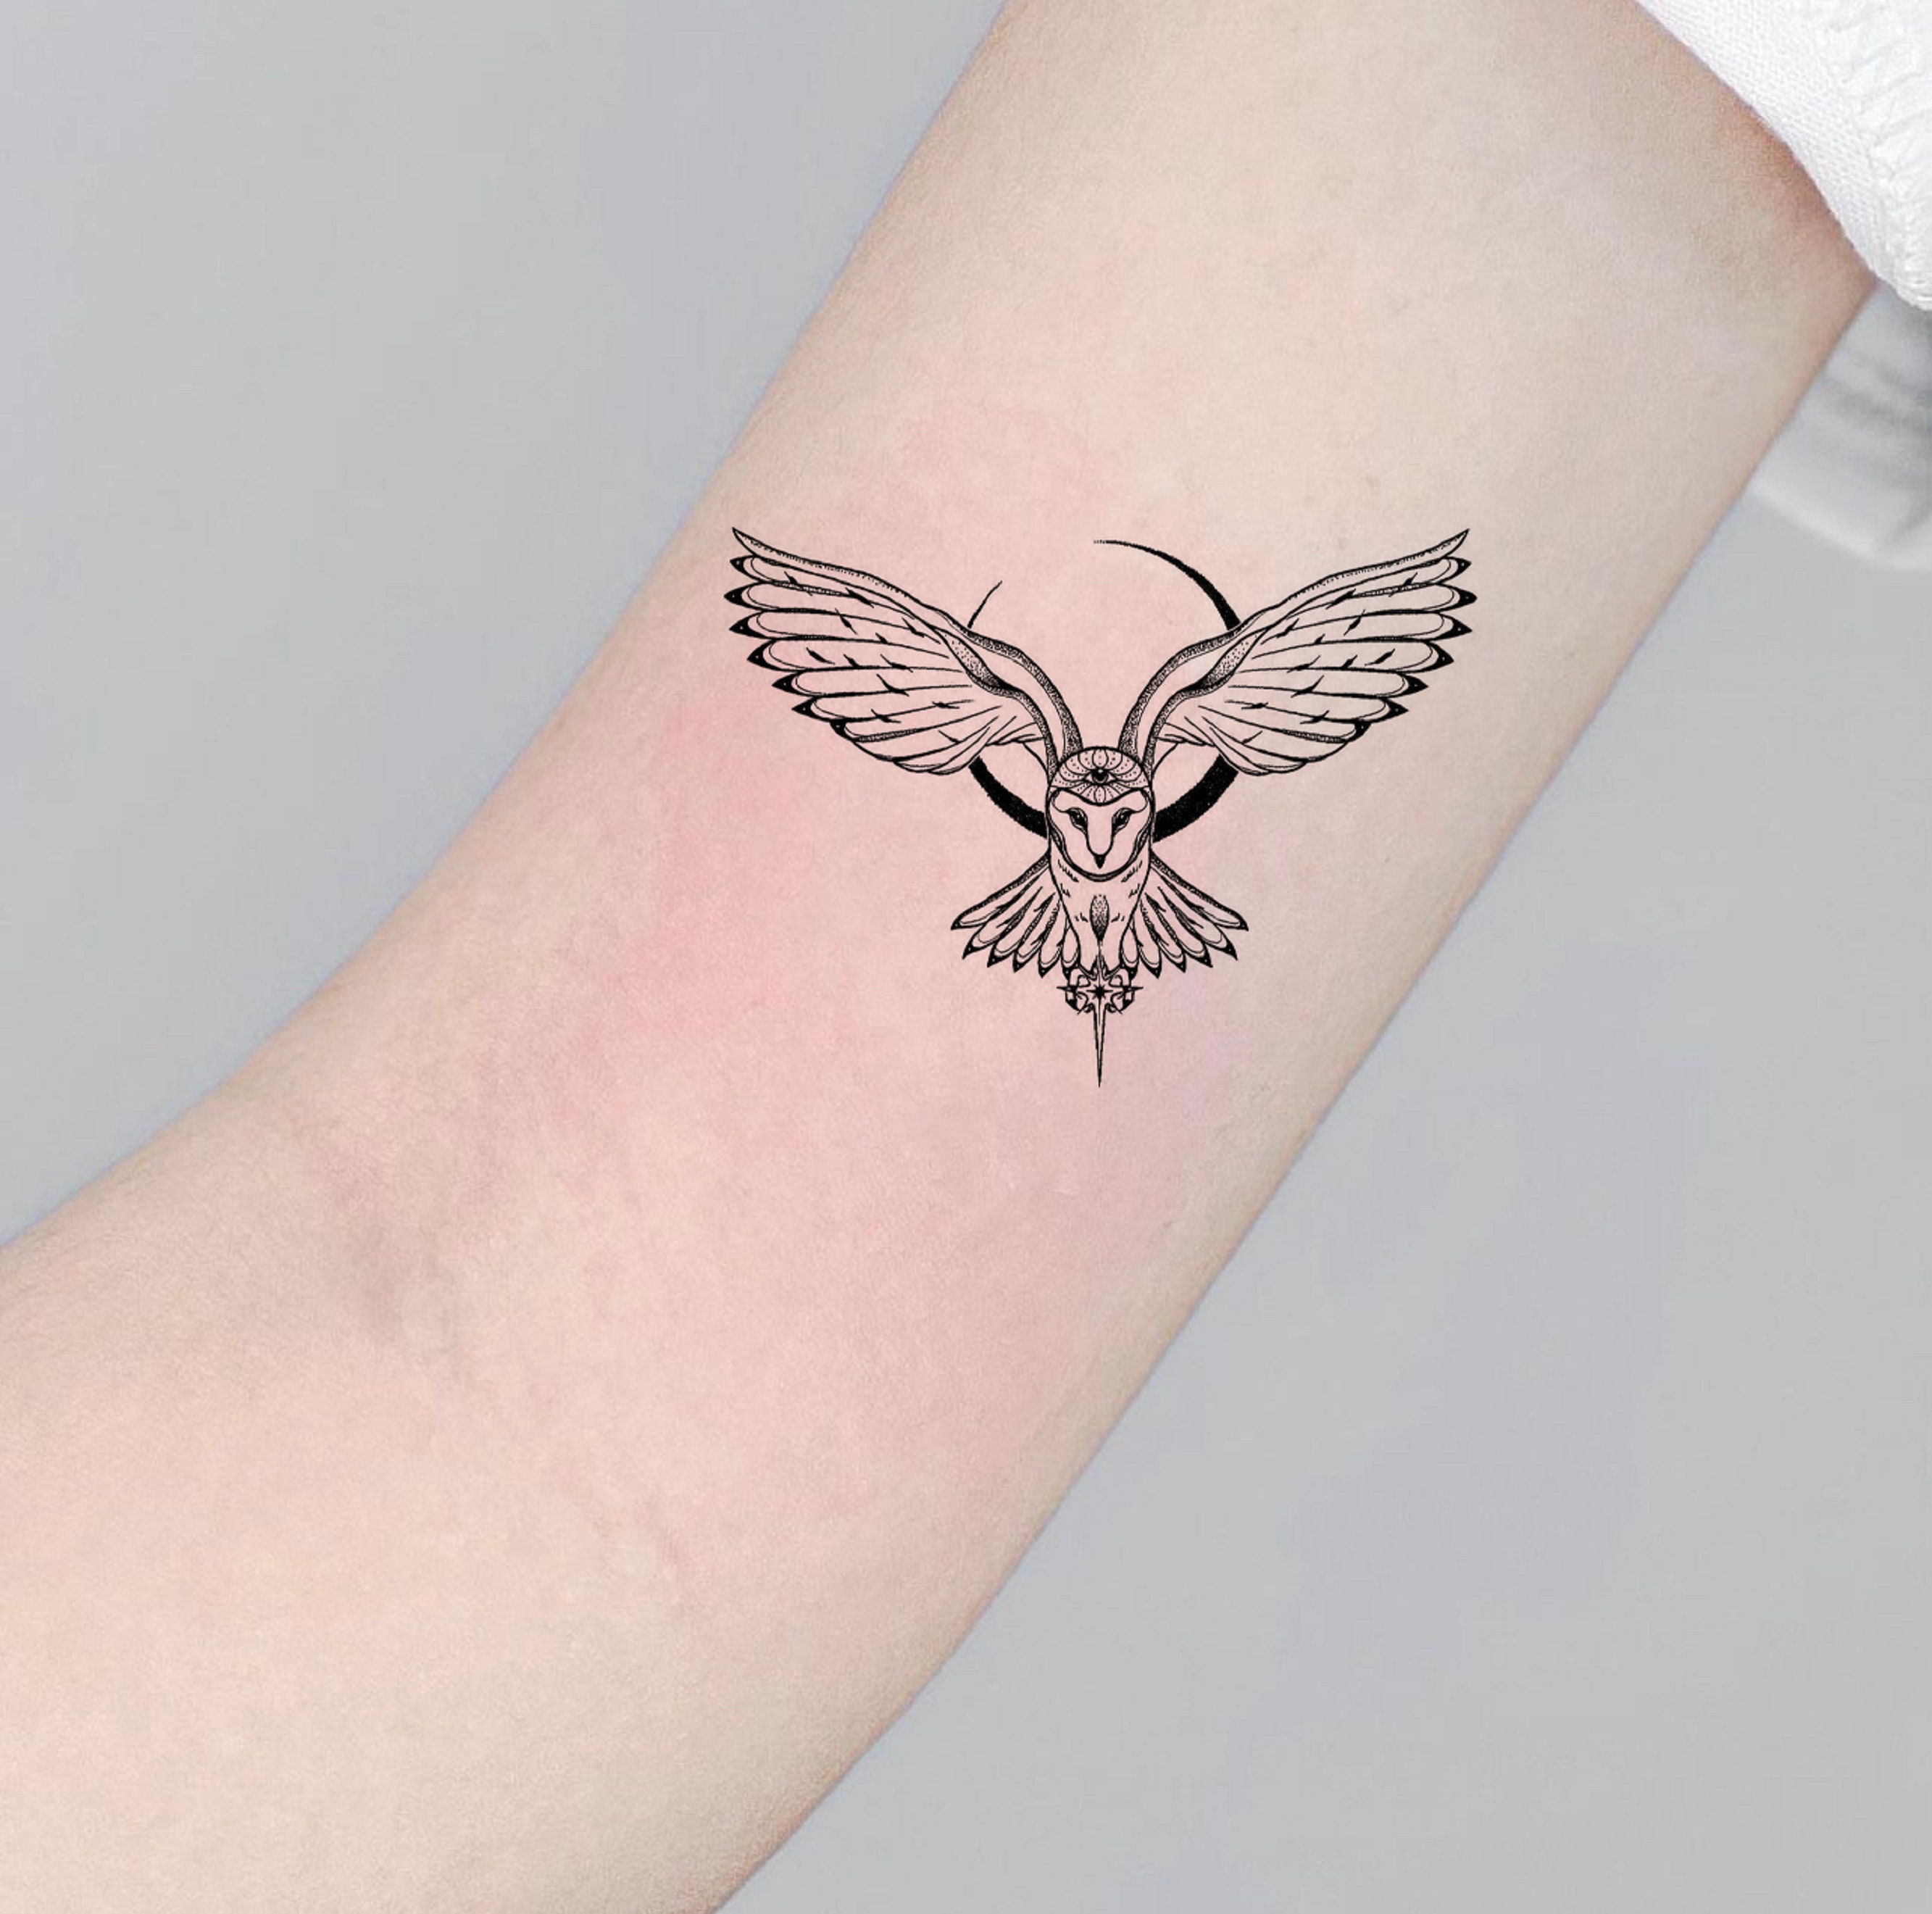 Buy Owl Temporary Tattoo, Owl Fake Tattoo, Bird Tattoo, Black Tattoo, Tiny  Tattoo, Meaningful Tattoo, Gift for Her, Symbol Tattoo Online in India -  Etsy